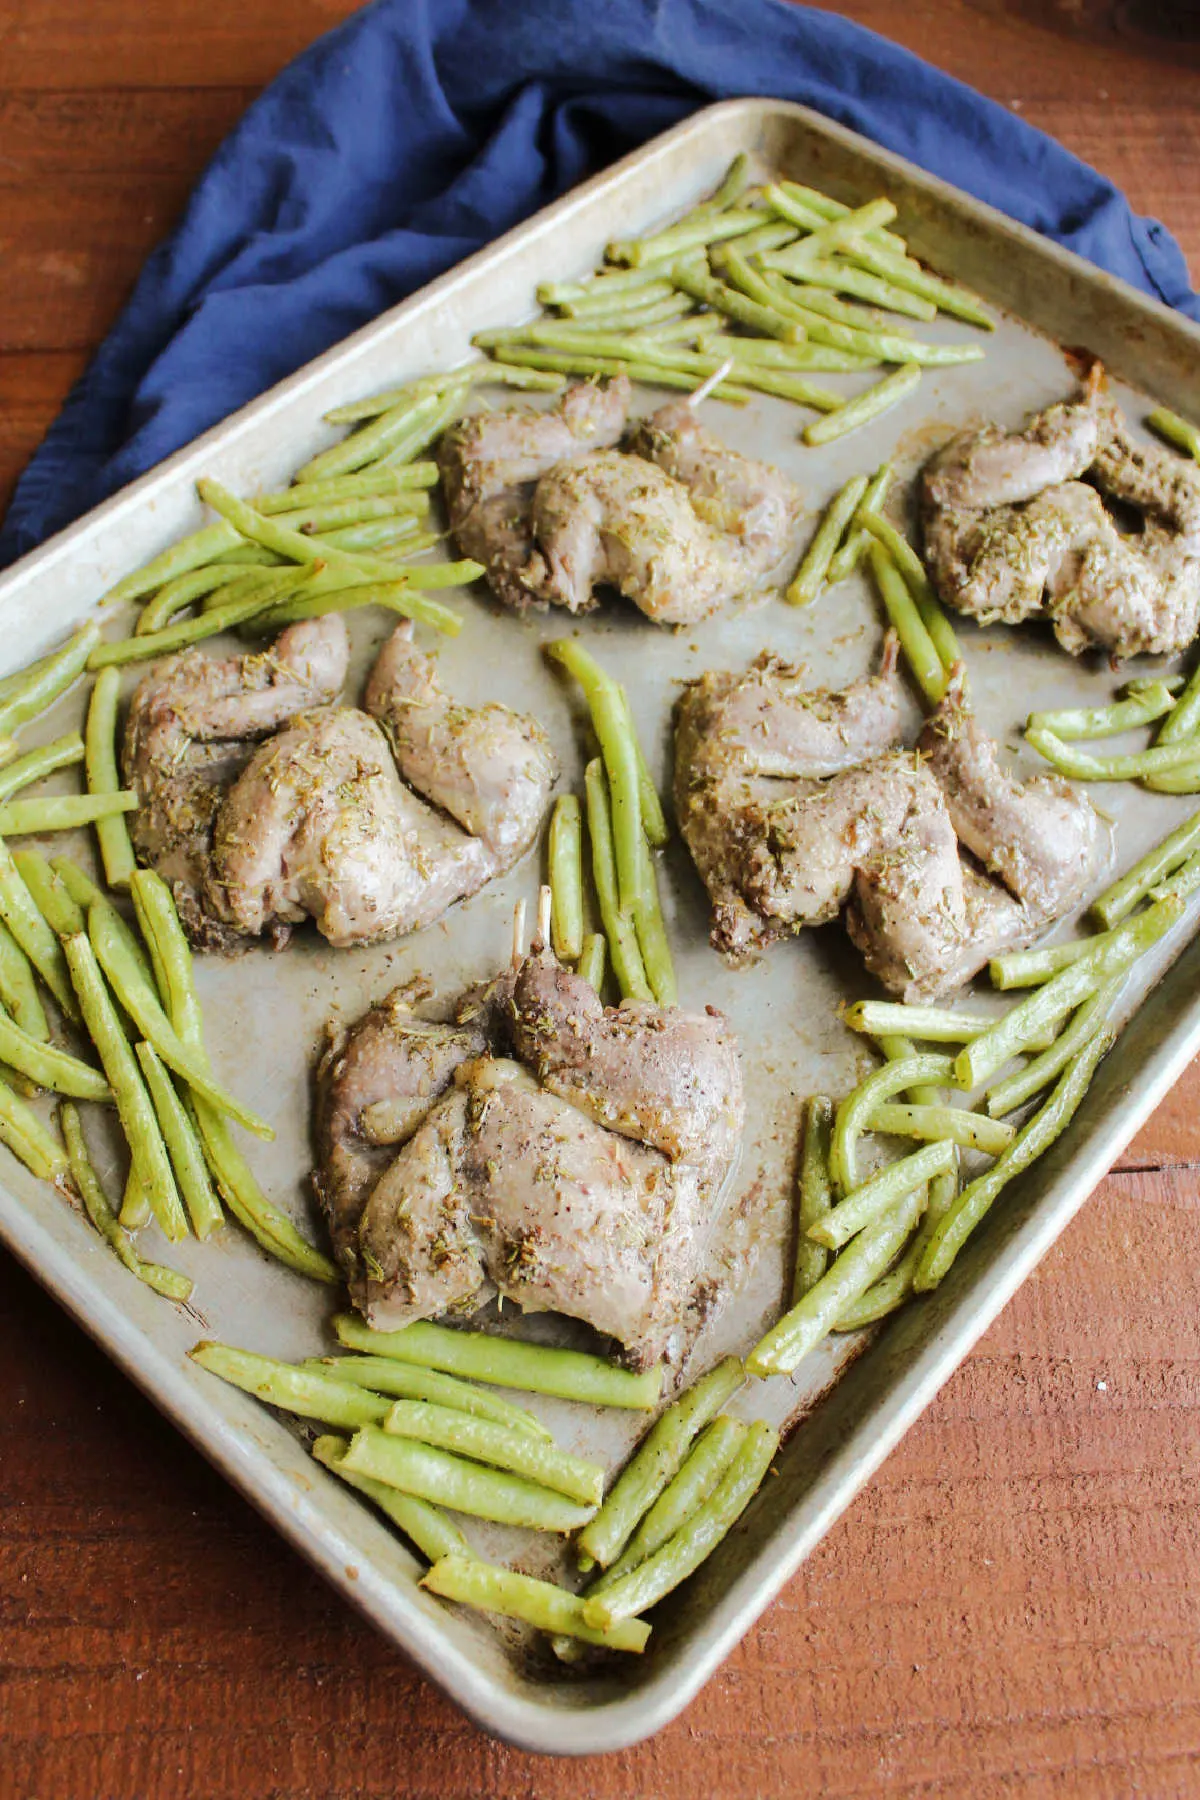 Roasted quail and green beans on sheet pan, ready to serve.